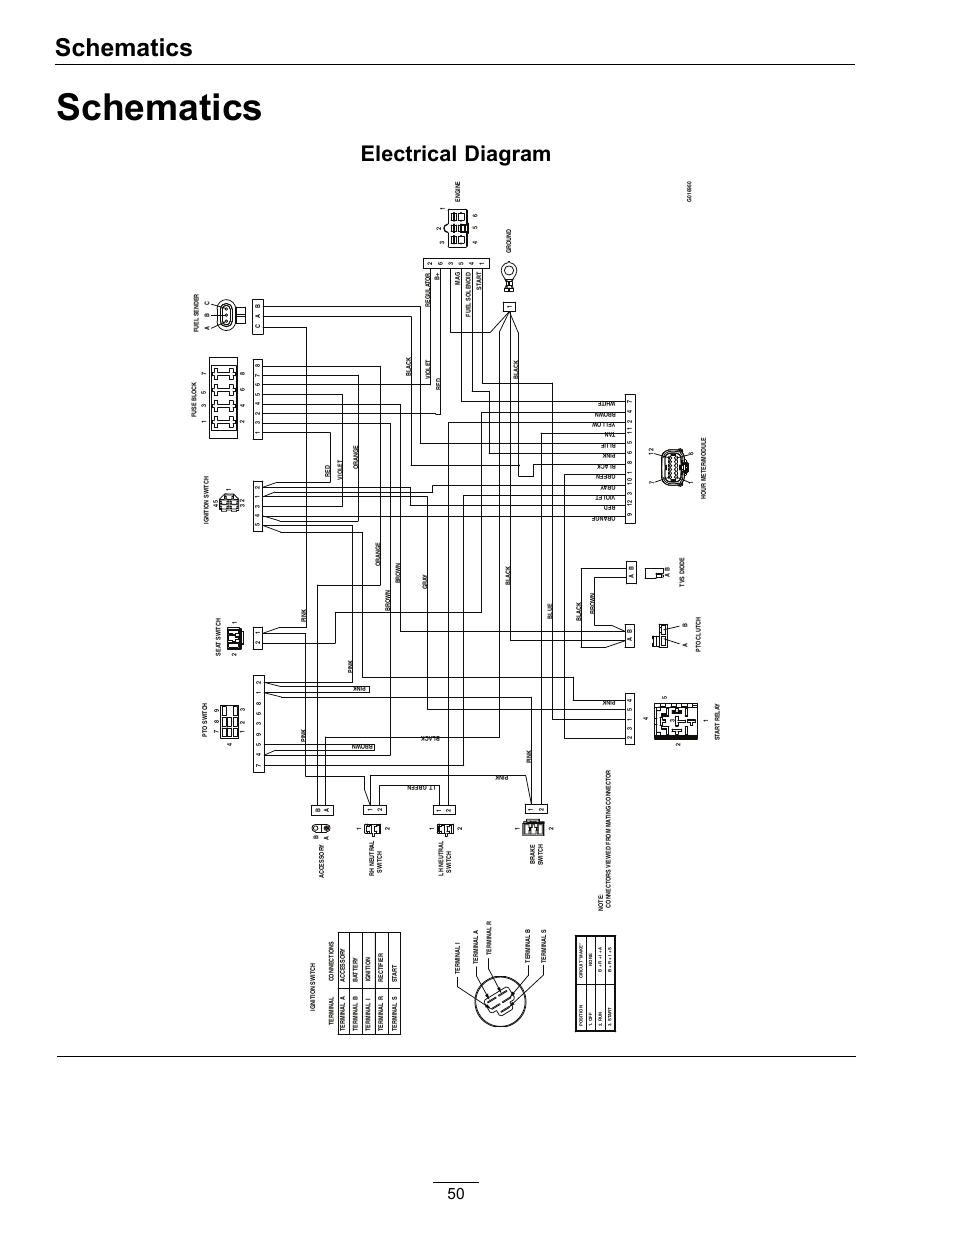 wiring diagram for metra wiring harness for a 2008 pontiac grand prix